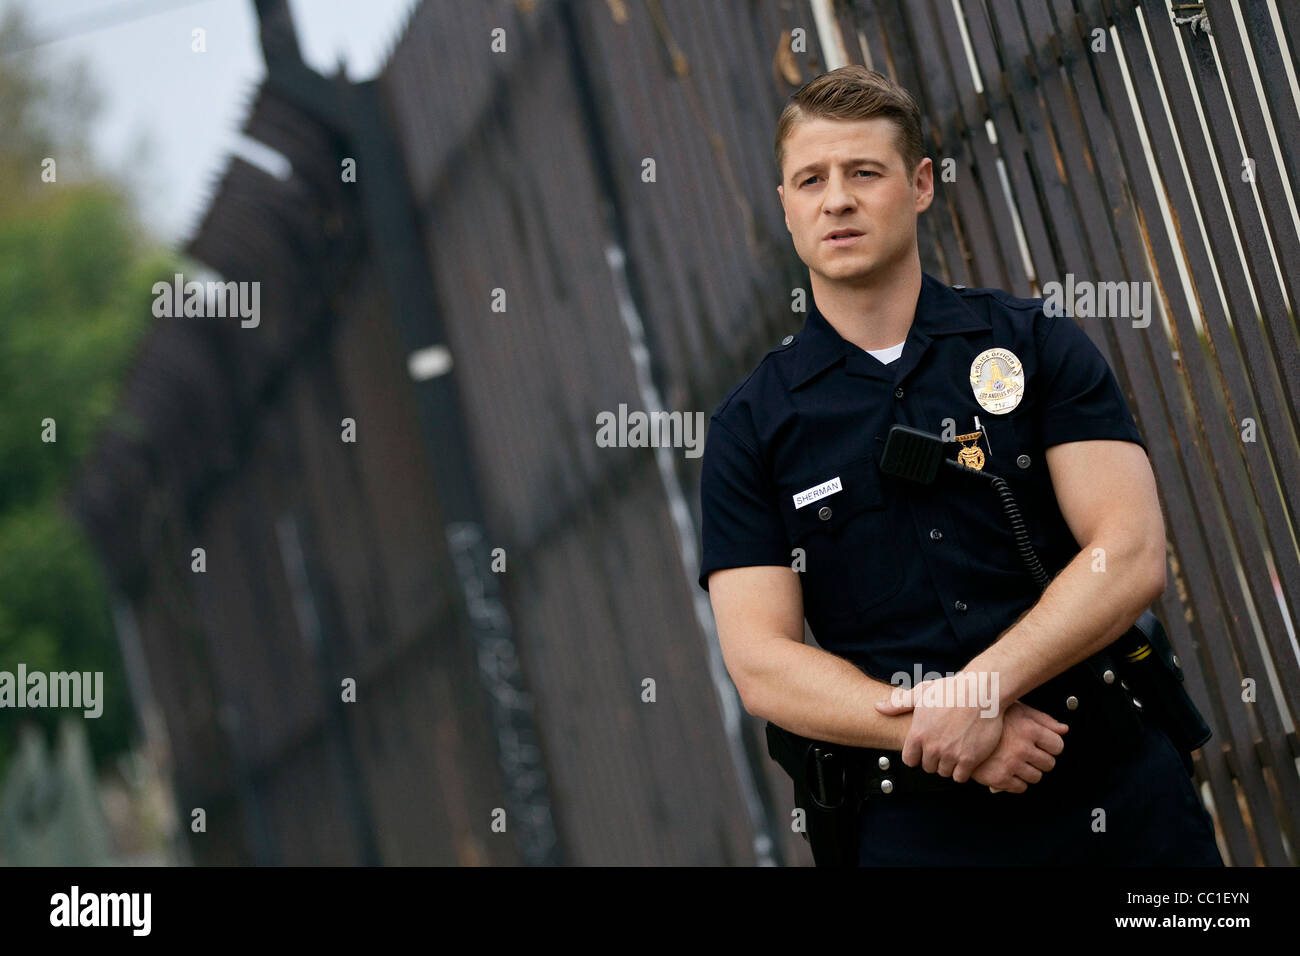 Officer Ben Sherman High Resolution Stock Photography and Images - Alamy